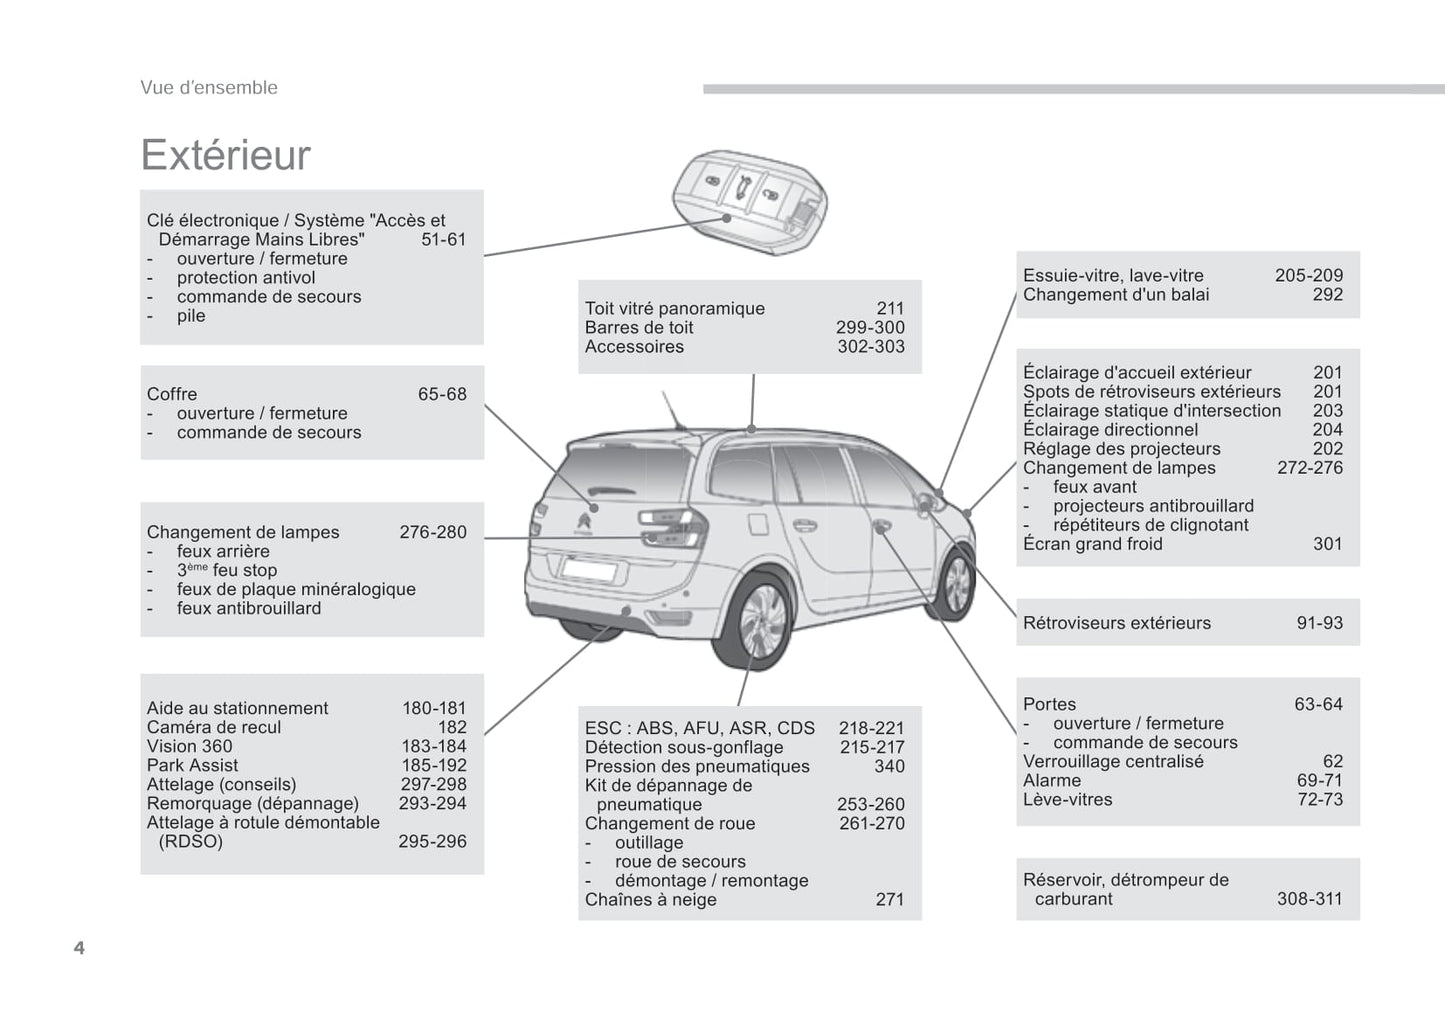 2014-2015 Citroën C4 Picasso/Grand C4 Picasso Owner's Manual | French